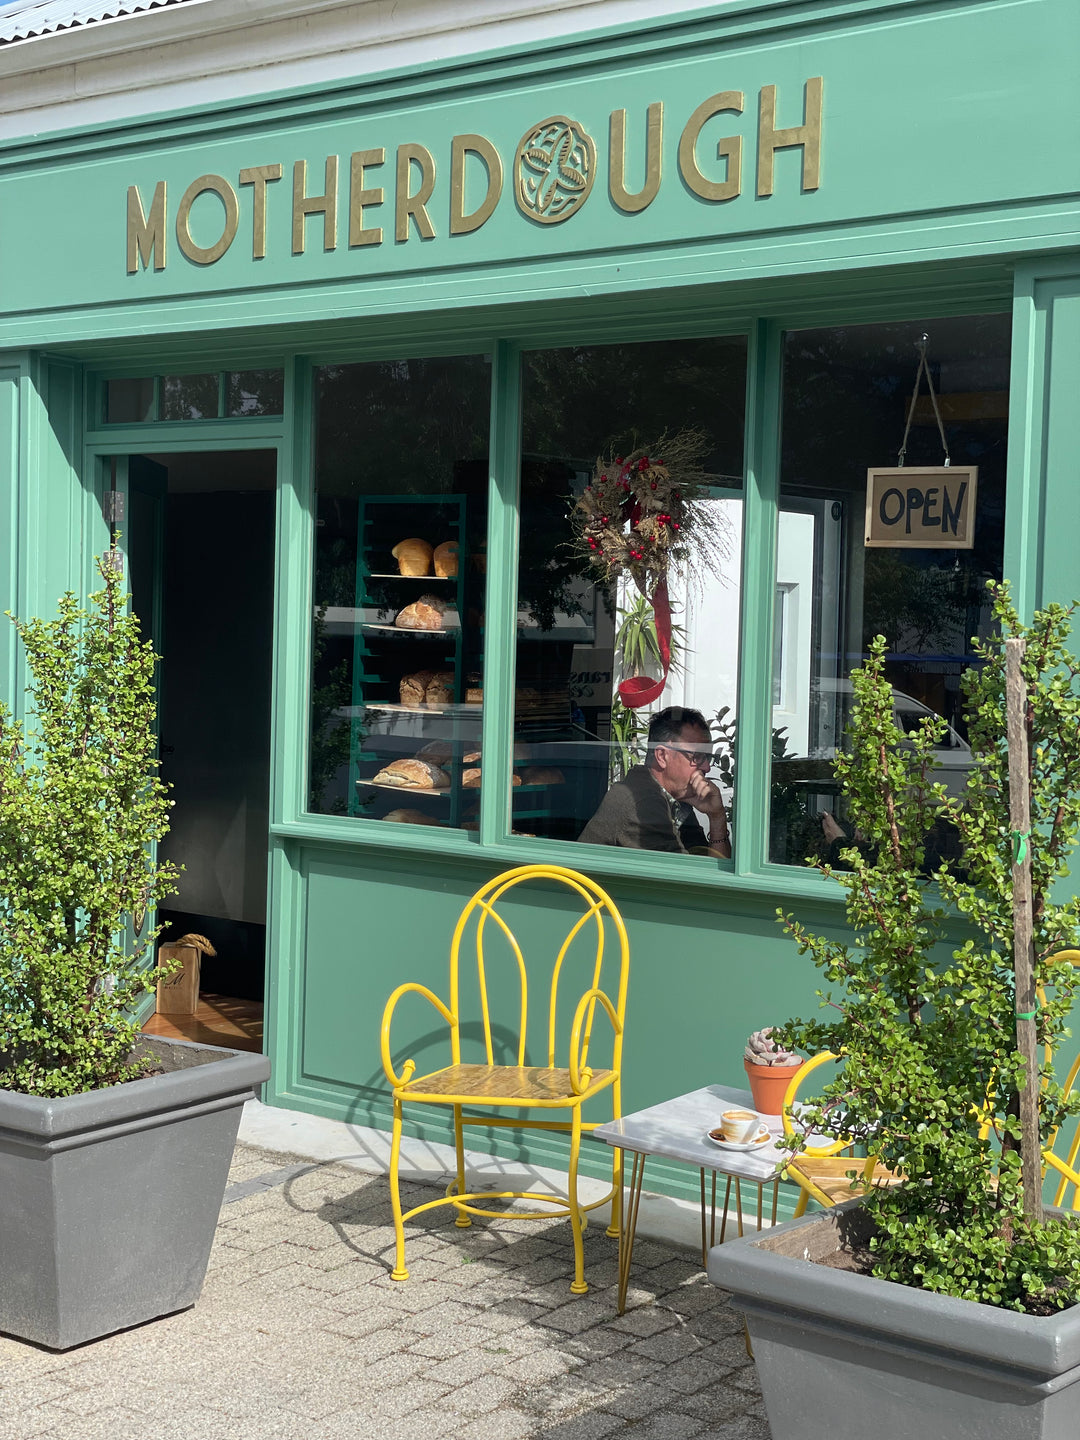 Who is Motherdough?